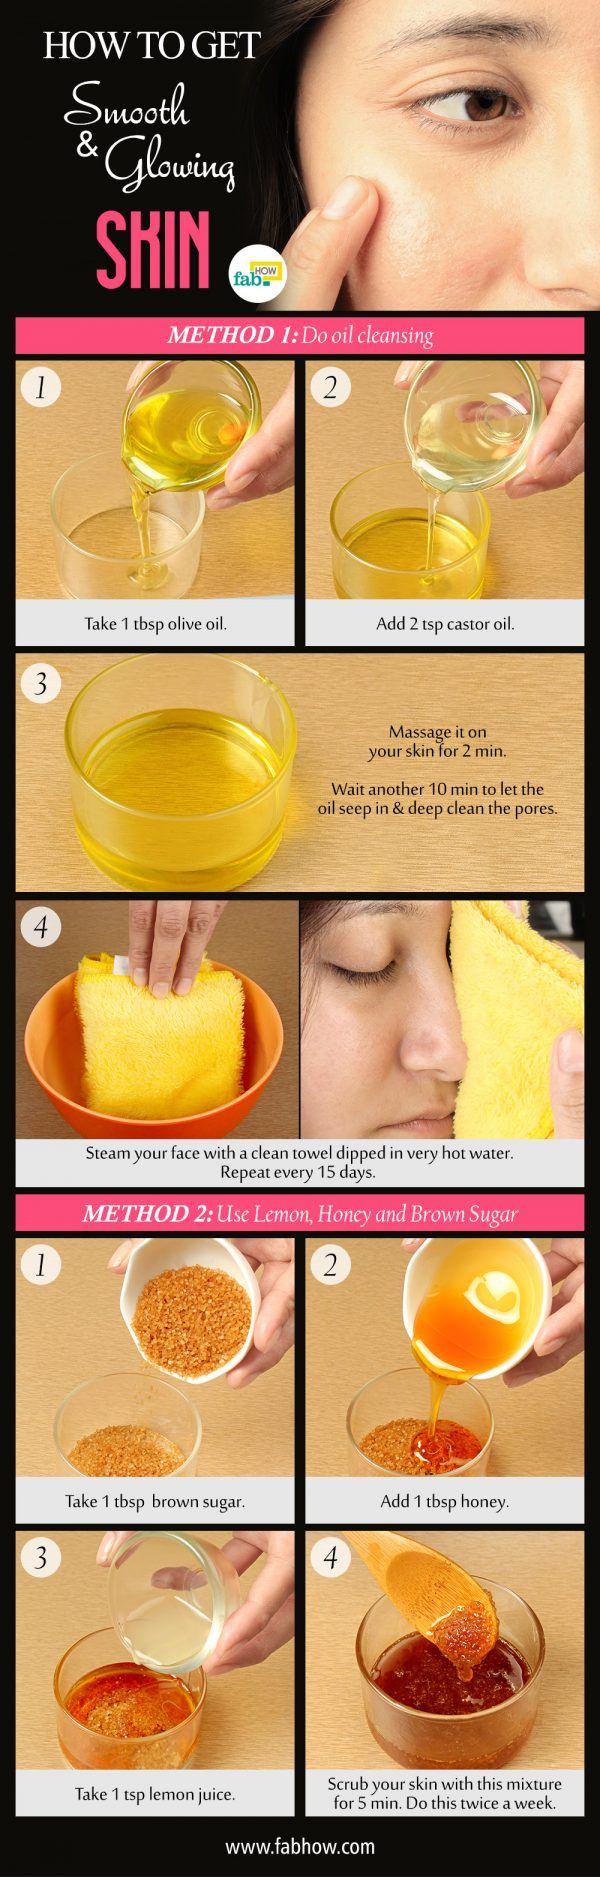 how to get smooth, clear and glowing skin in 10 minutes